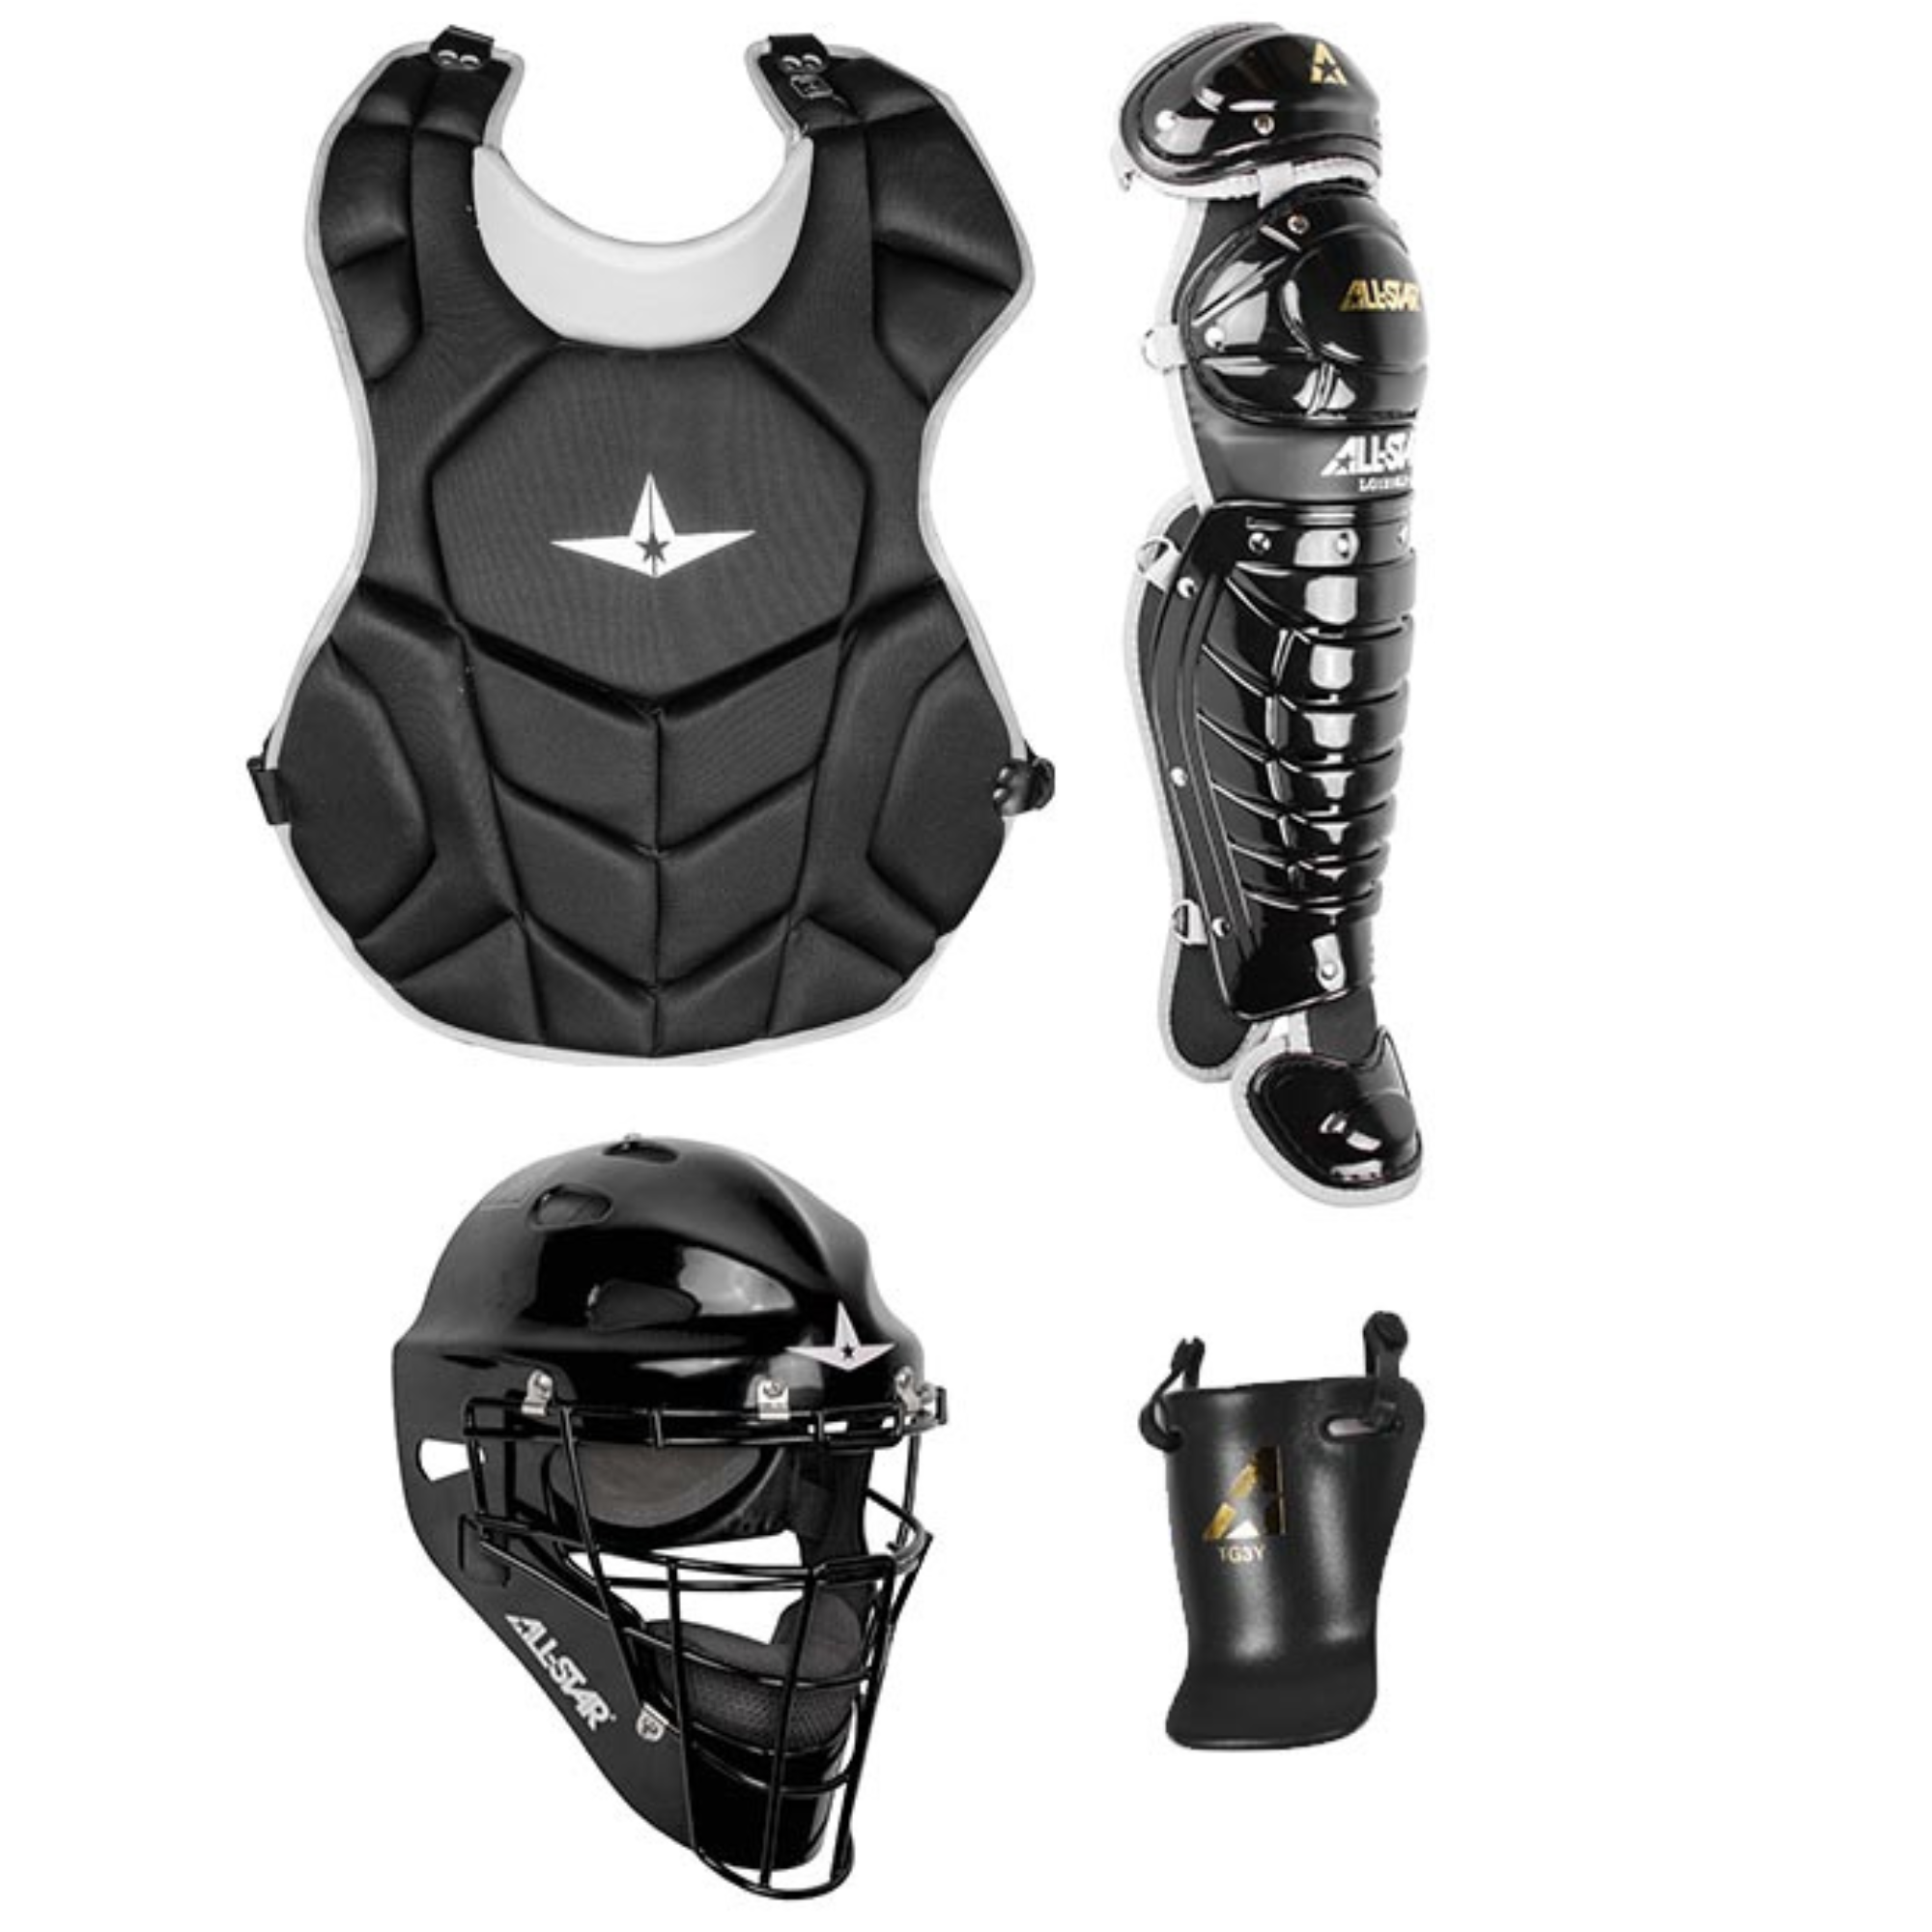 All-Star League Series Catching Kit / Meets NOCSAE / Ages 9-12